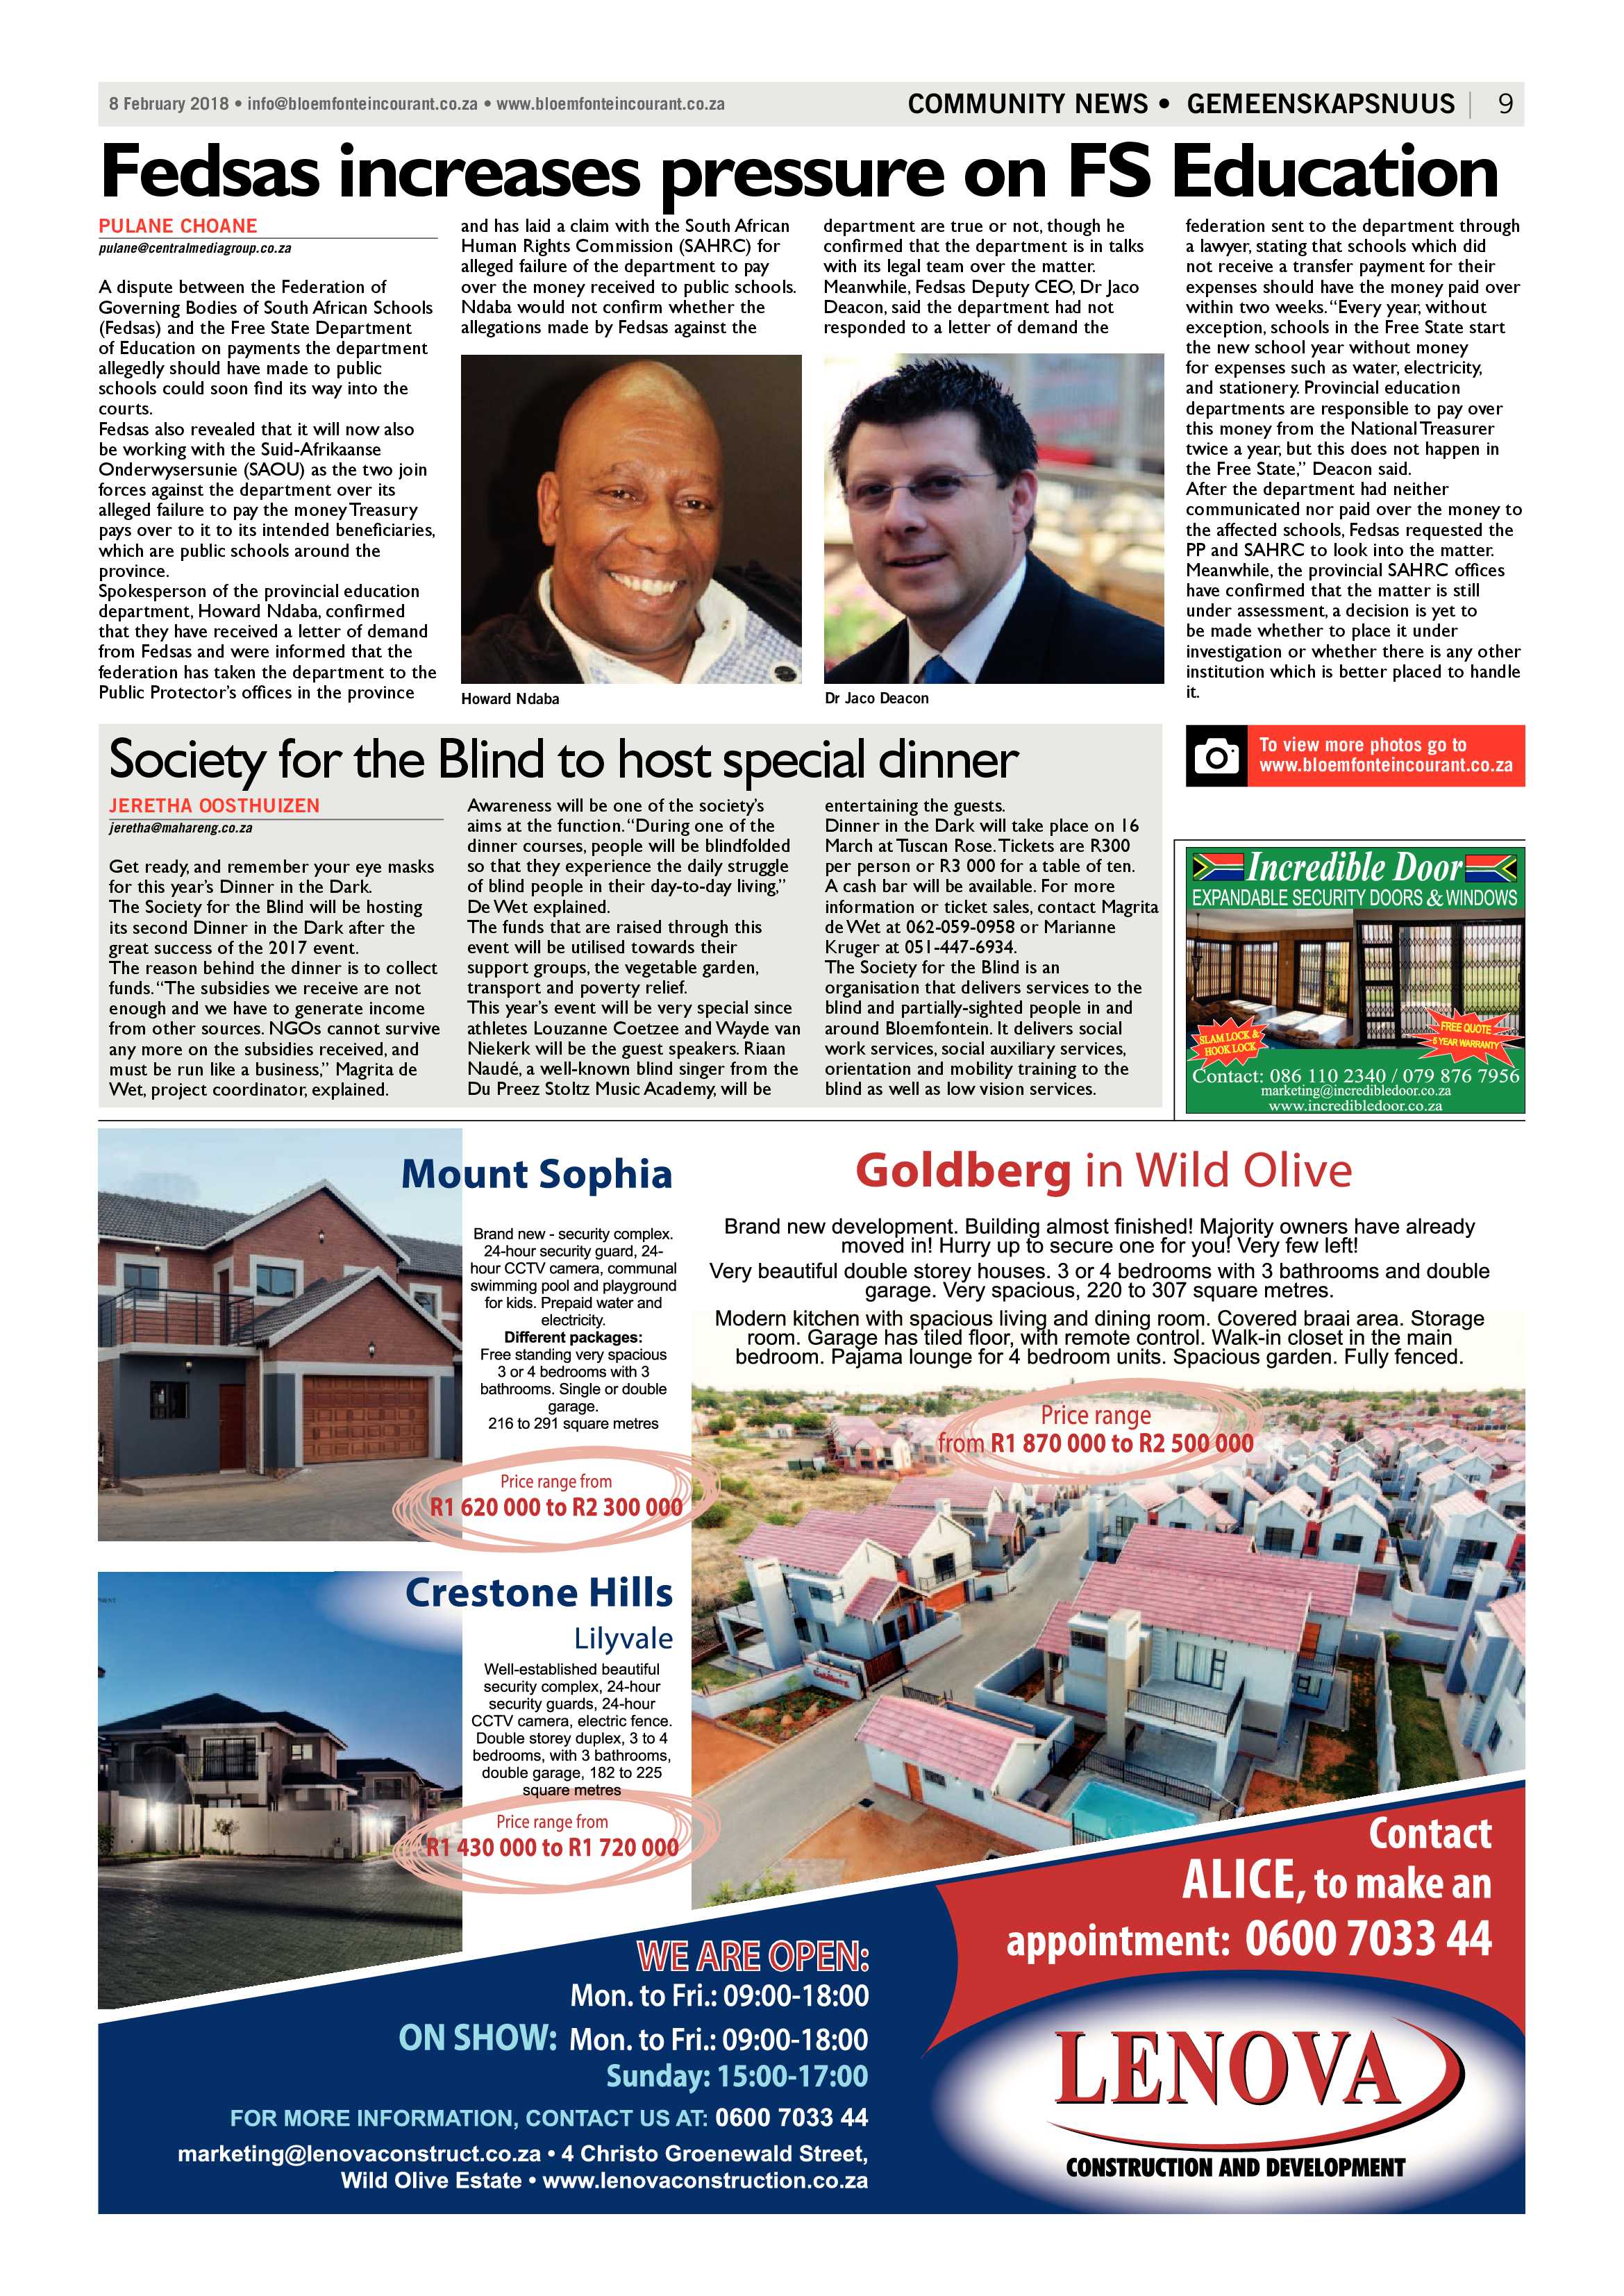 08-february-2018-bloemfontein-courant-epapers-page-9